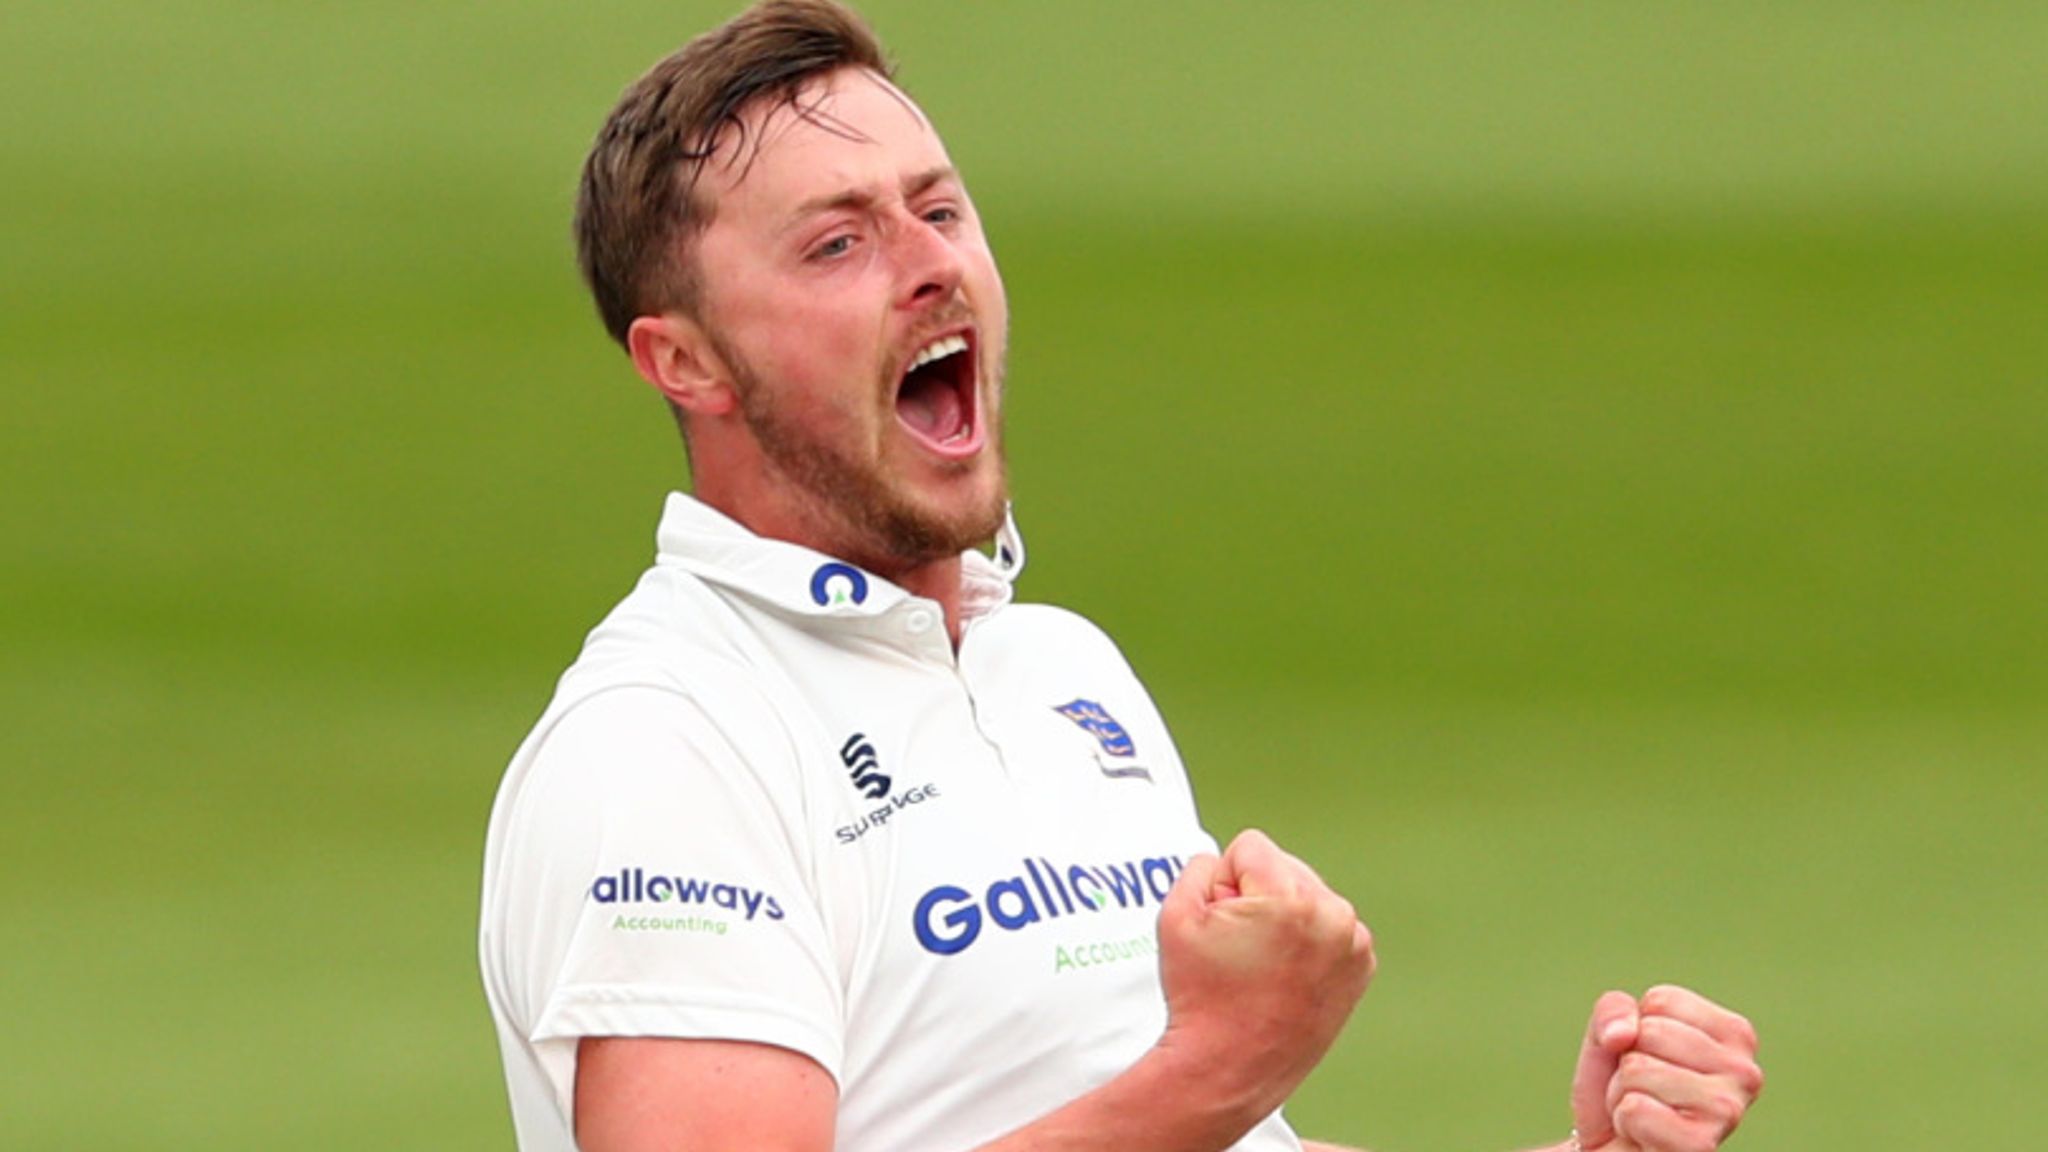 ENG vs SA Test Series: Ollie Robinson returns after INJURY layoff for Test series against South Africa: Check full squad, England vs SouthAfrica LIVE